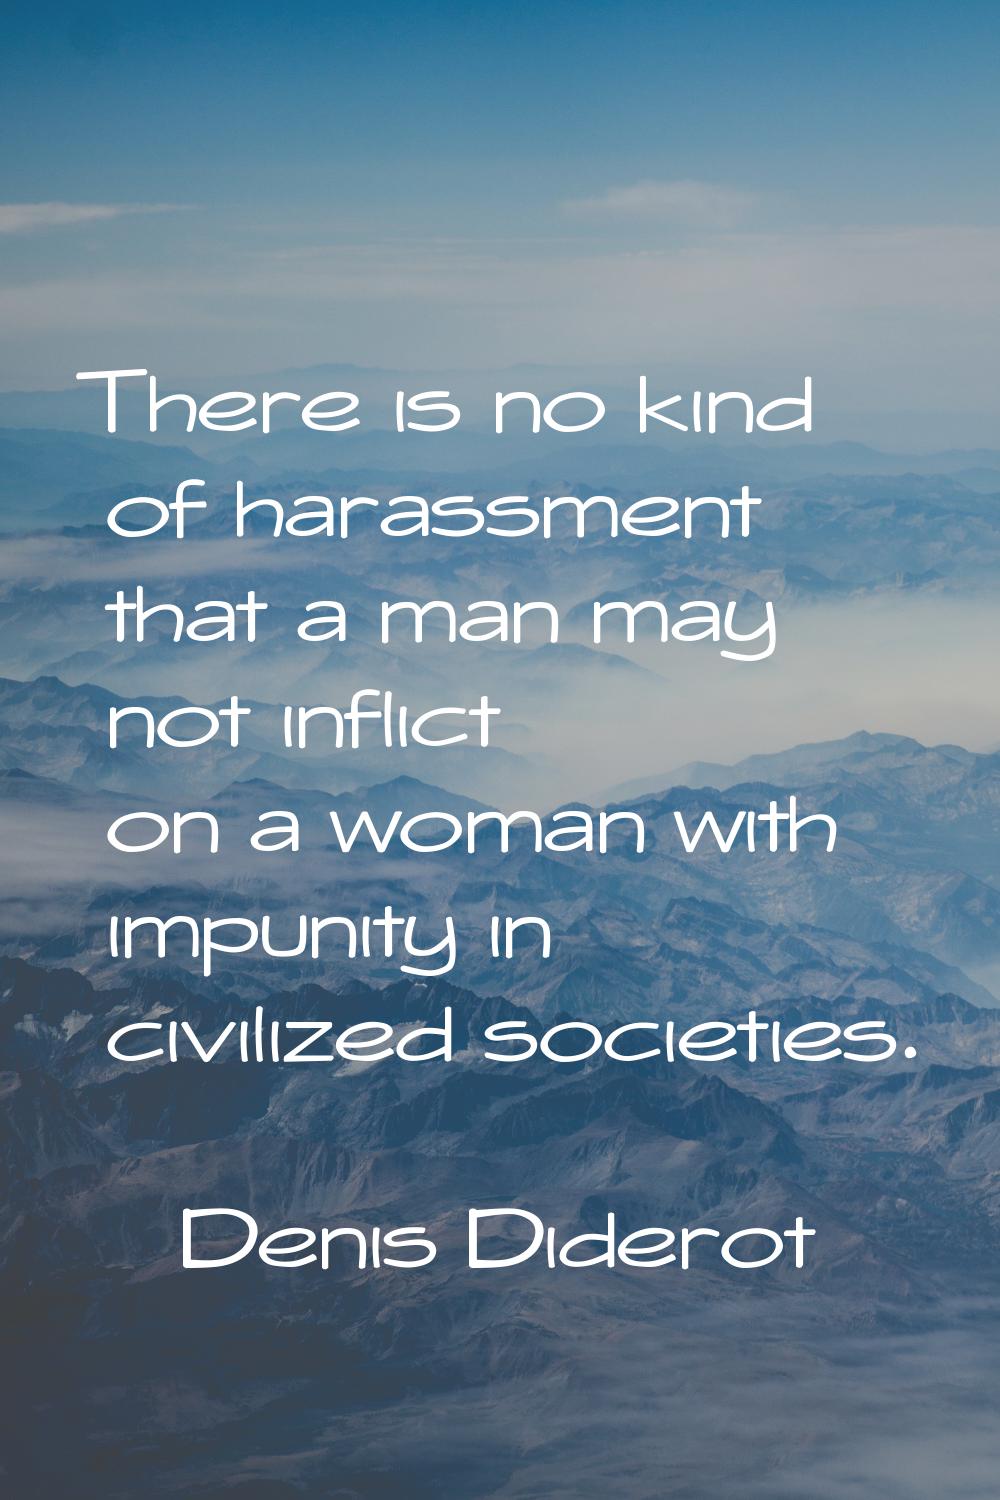 There is no kind of harassment that a man may not inflict on a woman with impunity in civilized soc